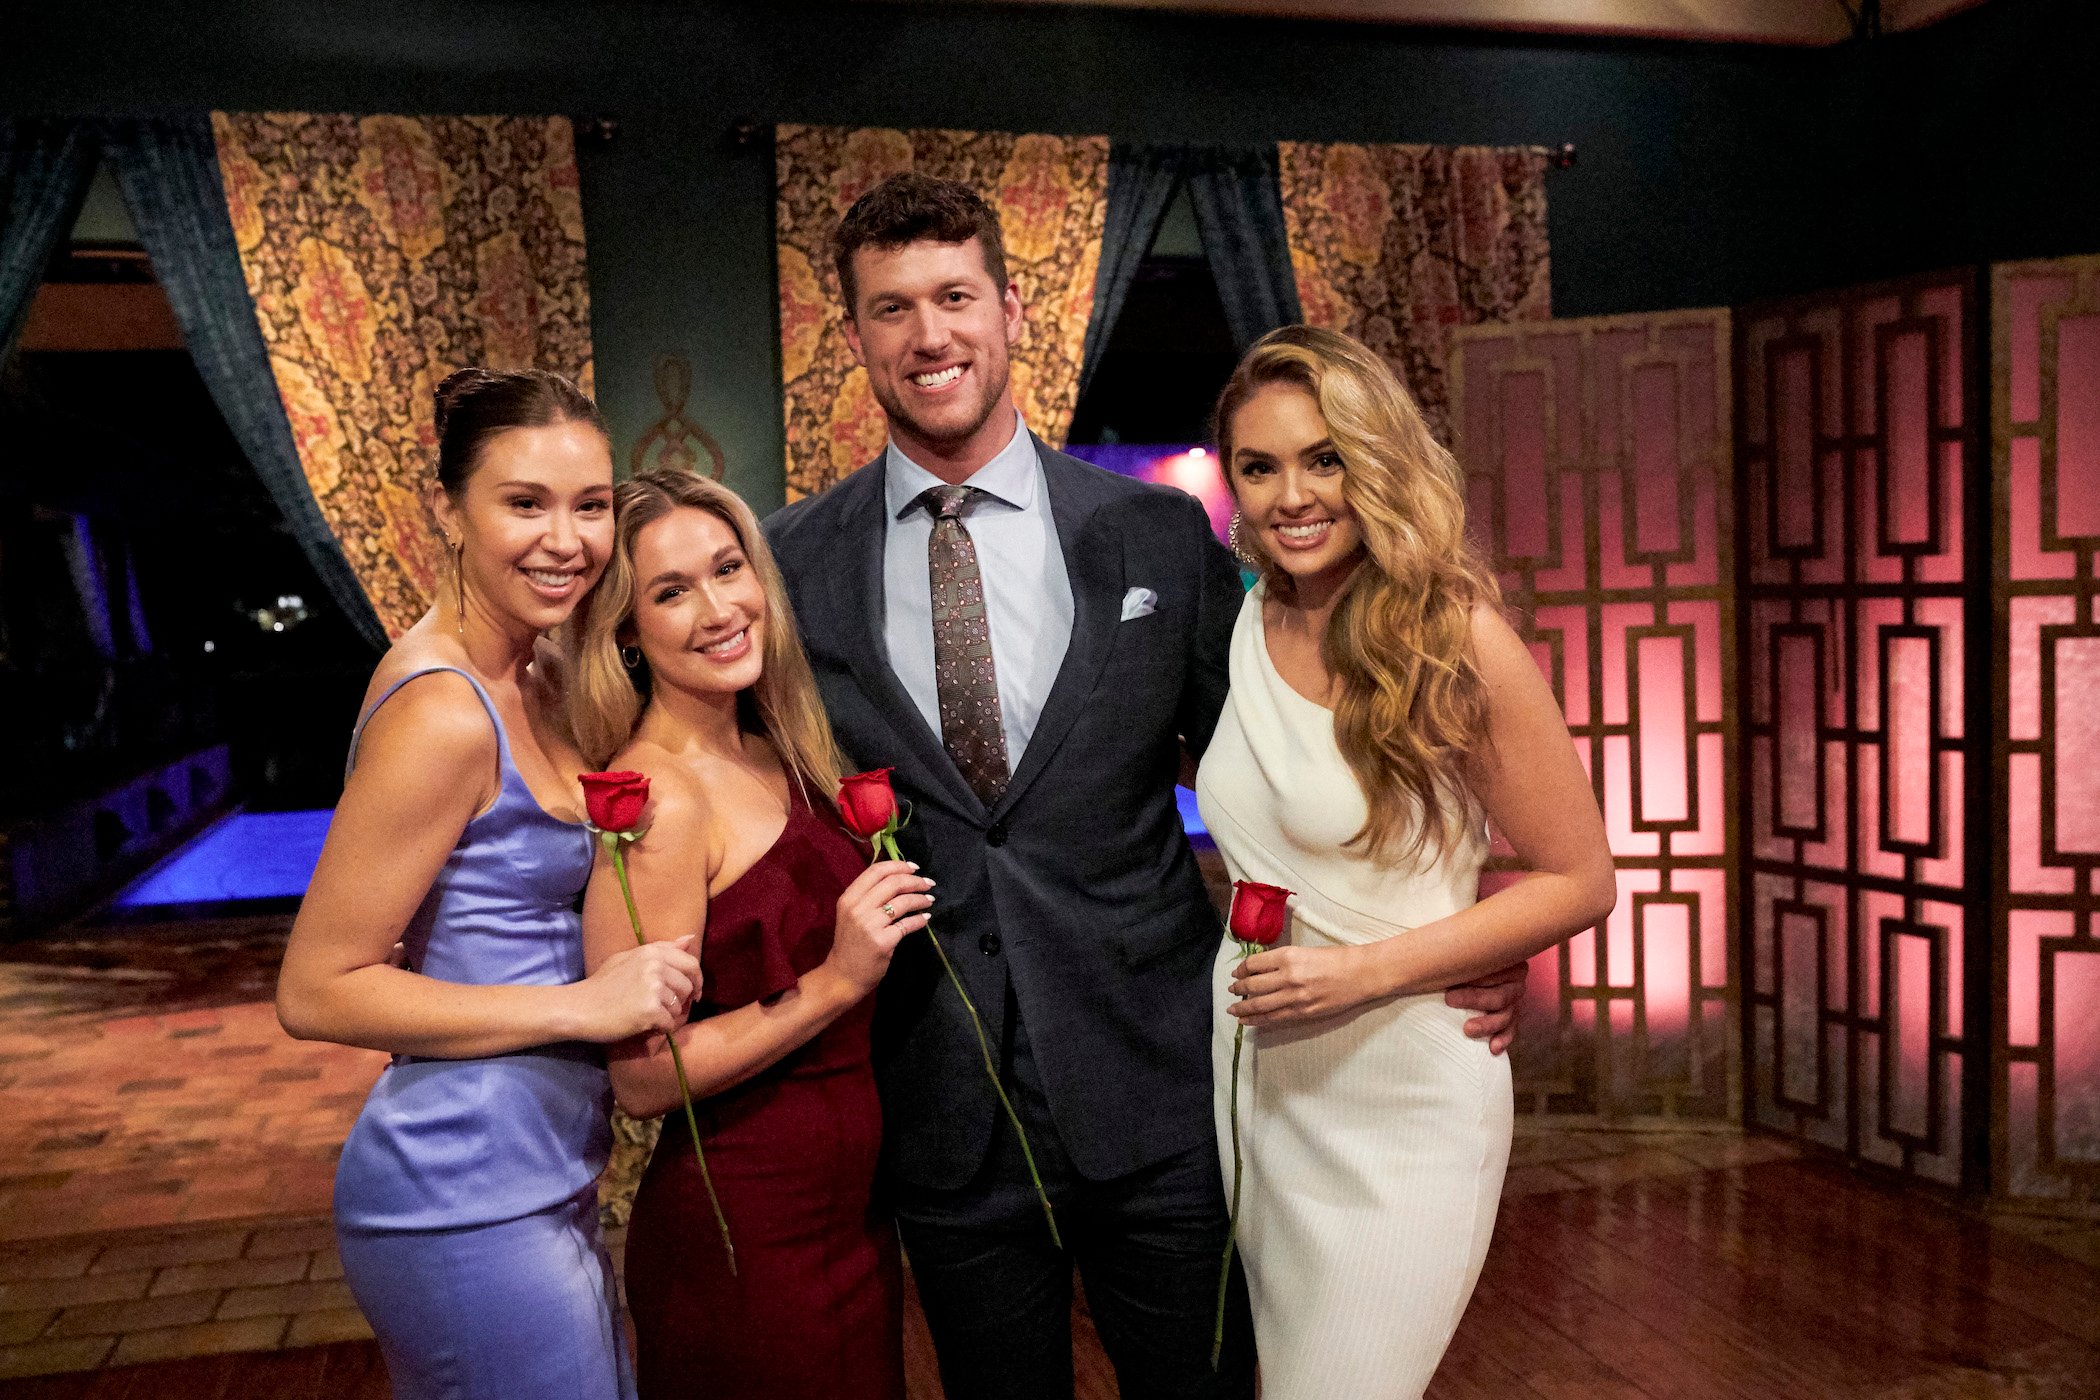 Clayton Echard smiling with Gabby, Rachel, and Susie from 'The Bachelor' as they each hold a rose